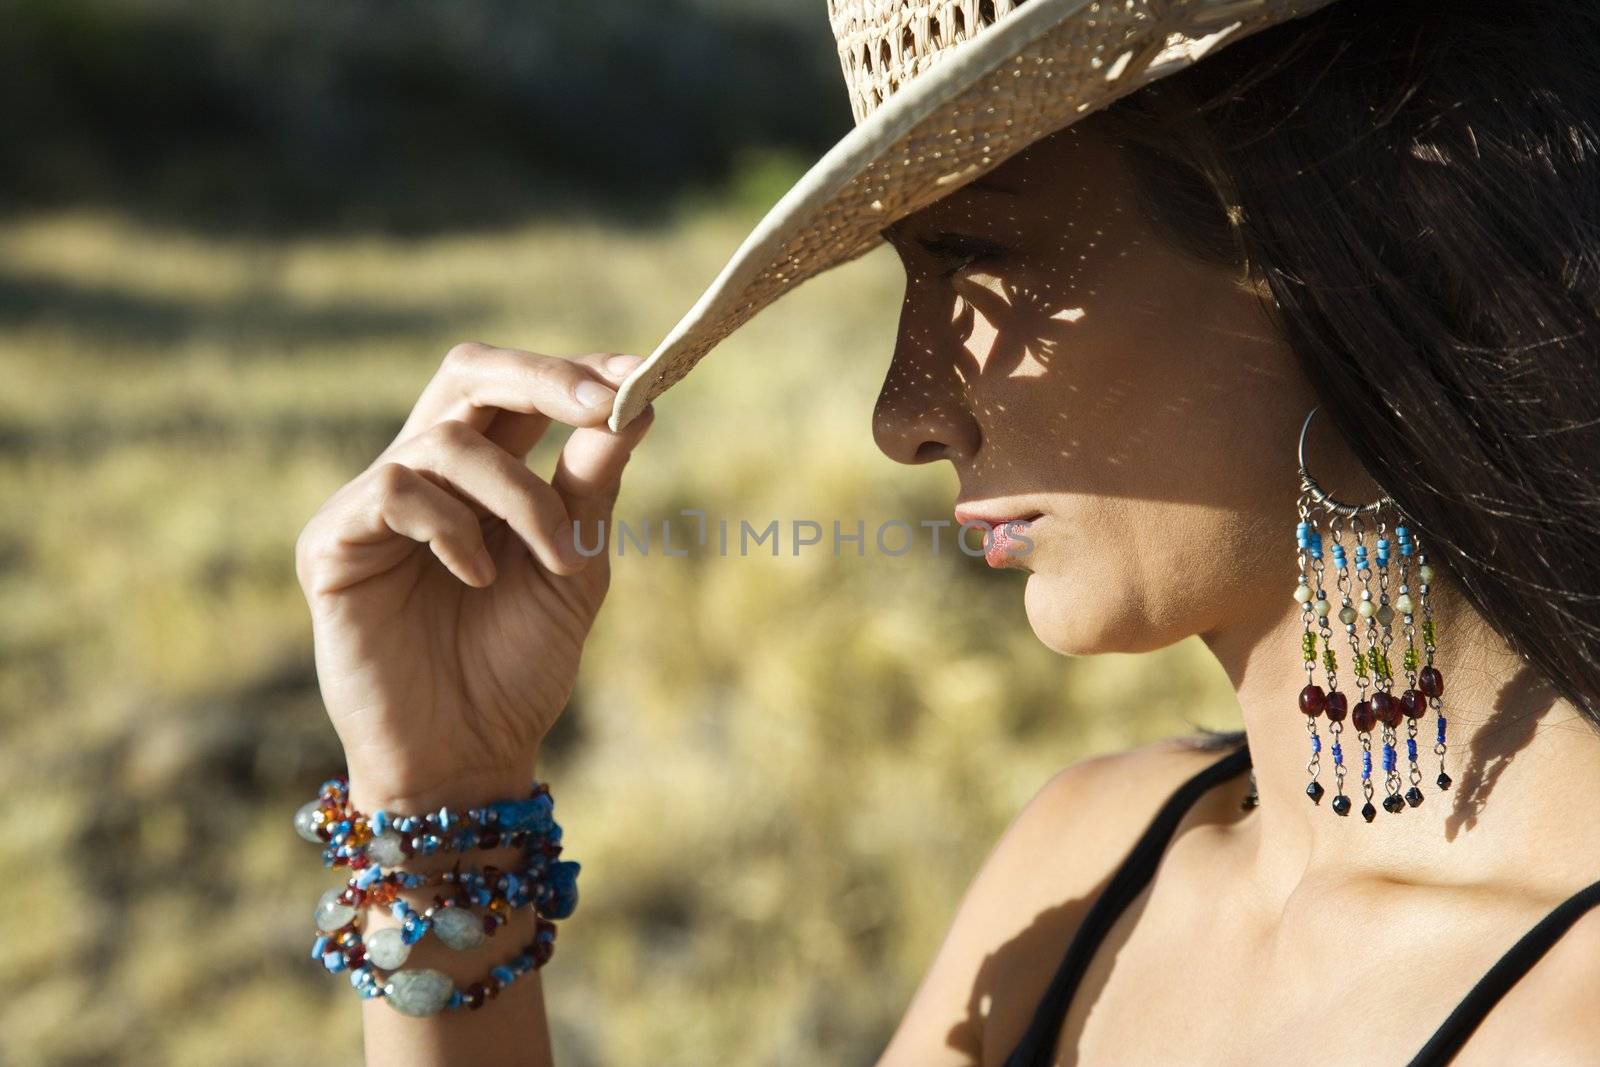 Close-up profile of mid-adult Caucasian woman tipping straw cowboy hat.